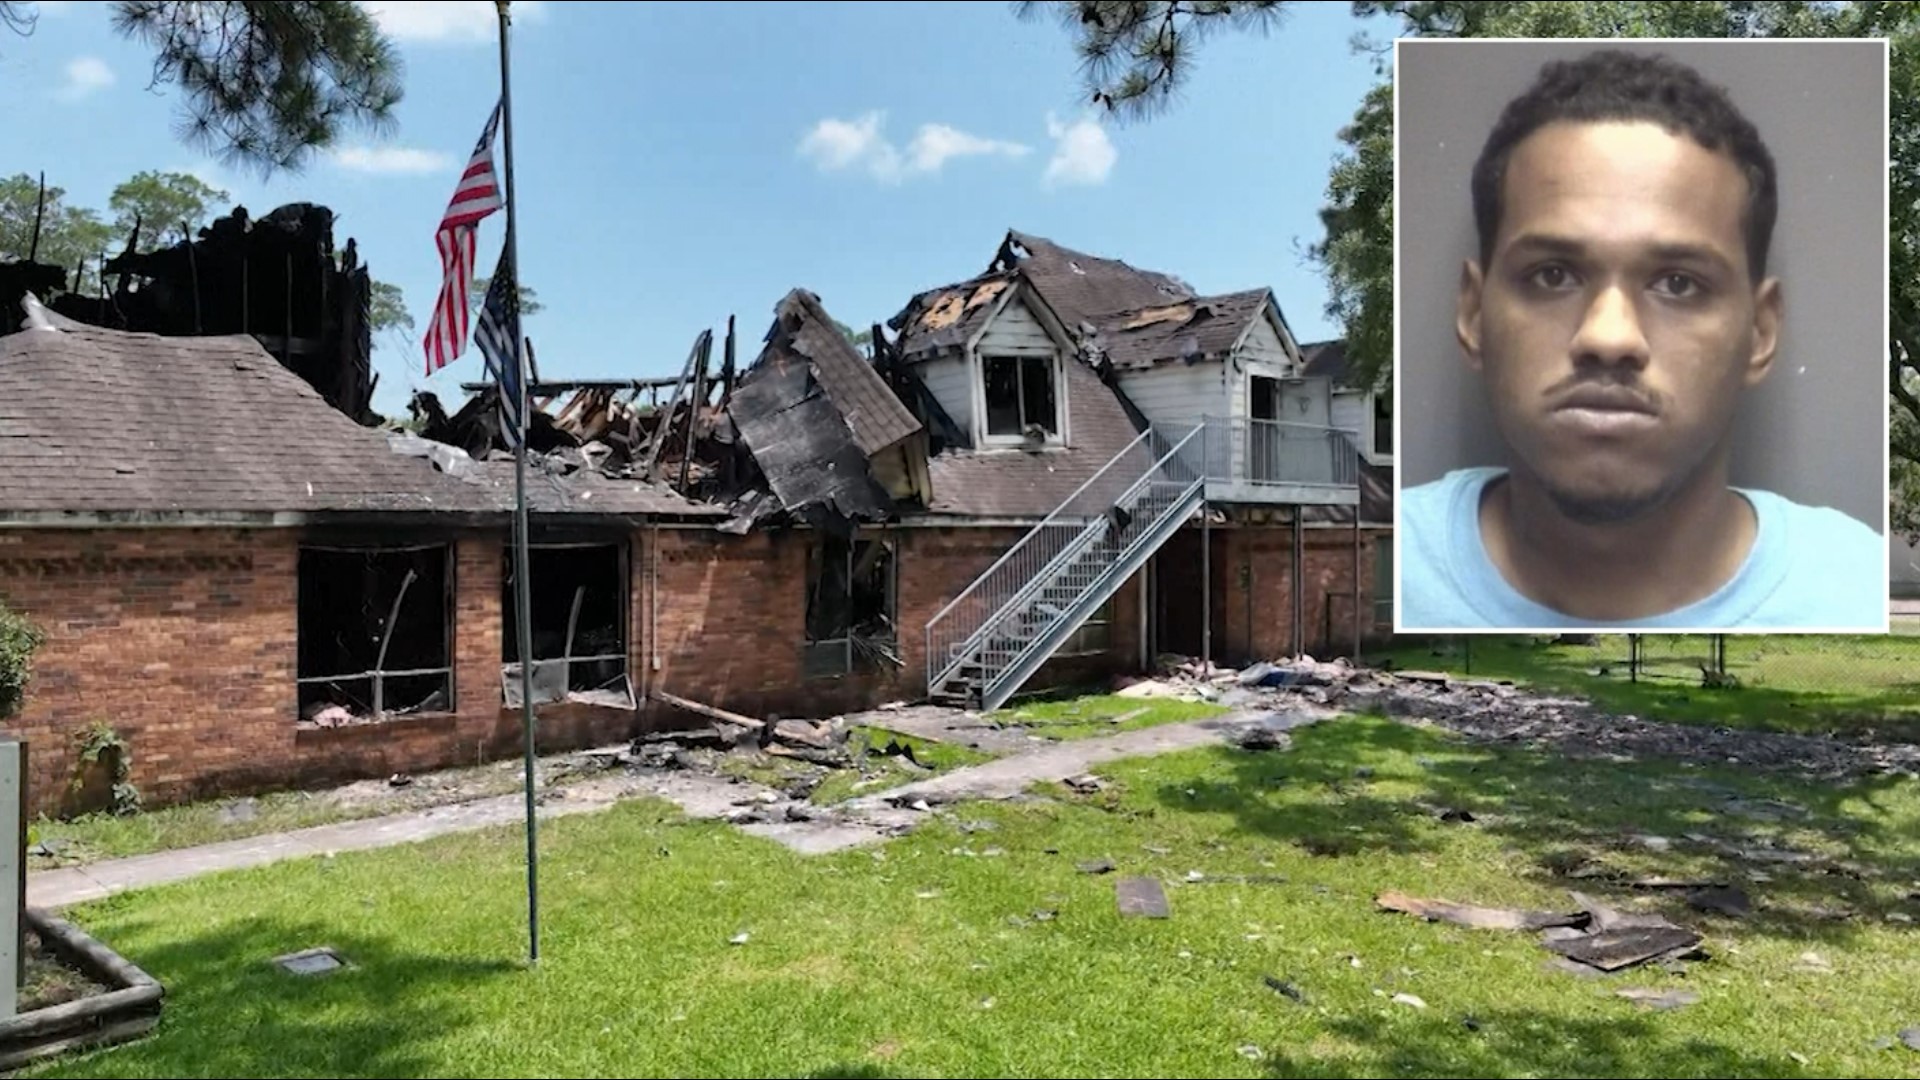 Investigators said they figured out that 24-year-old Tyrese Travon Samuel had been stealing from the church two days after the fire was set.